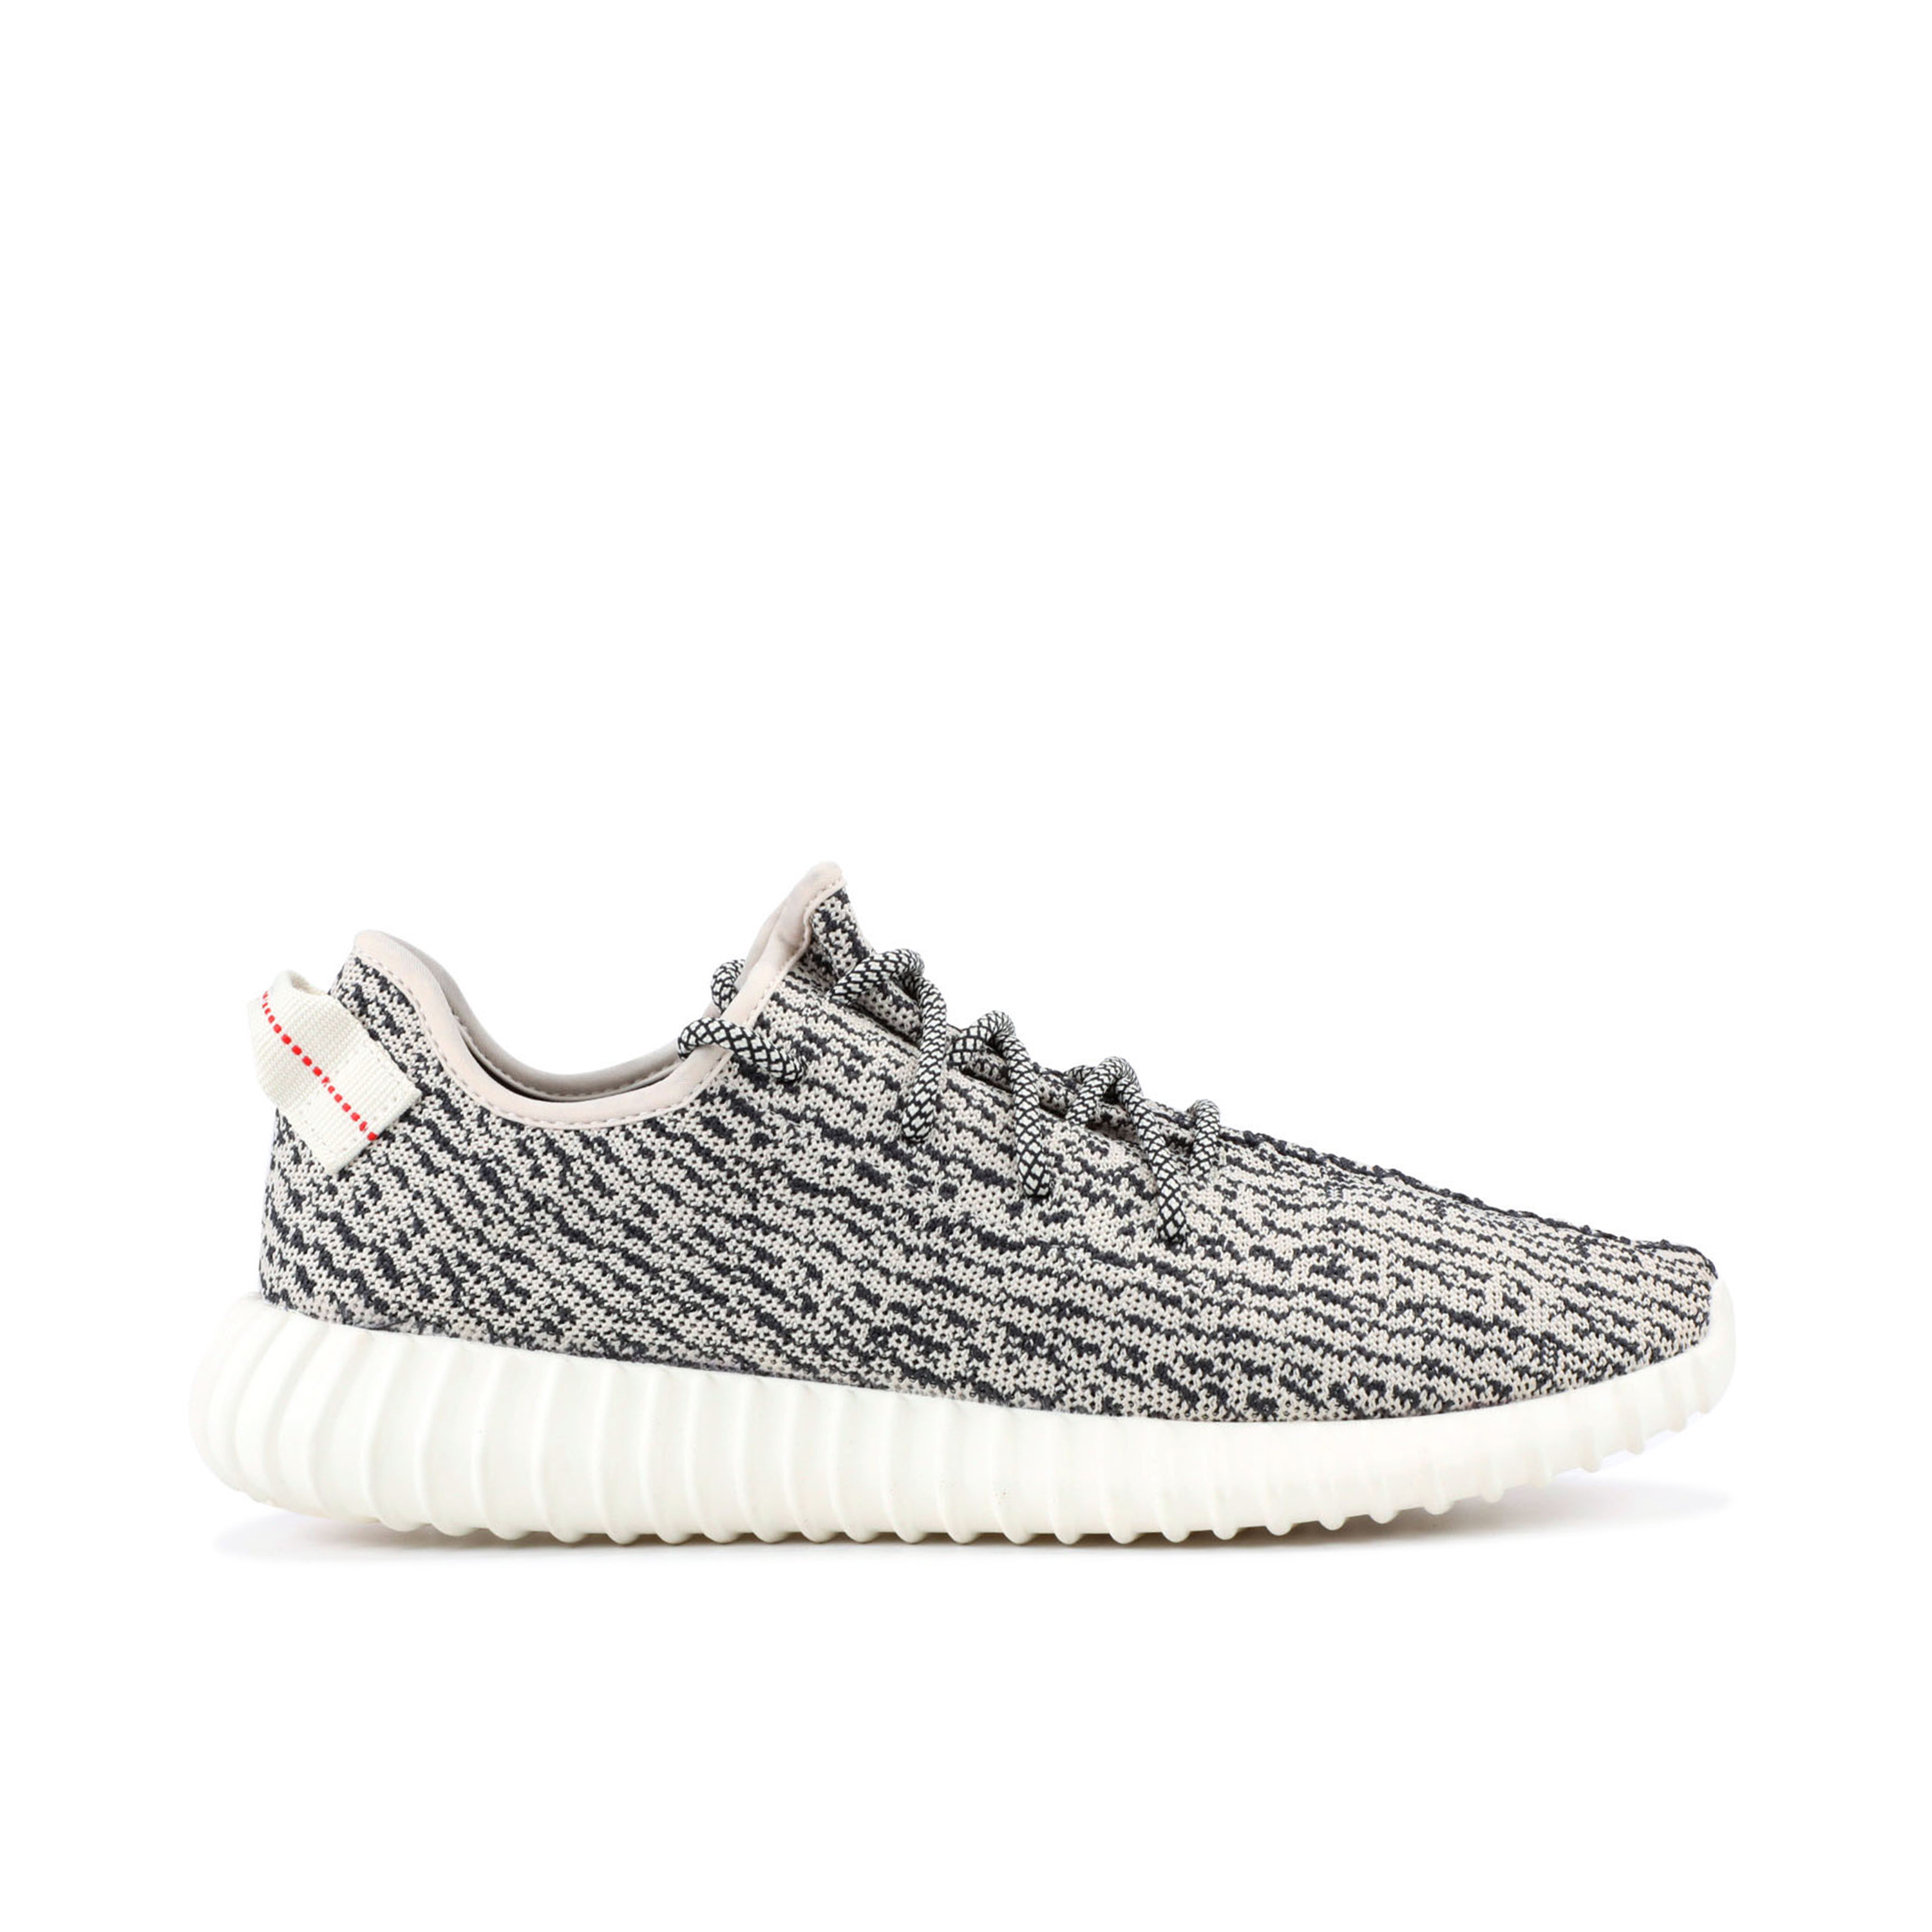 Yeezy Boost 350 Turtle Dove AQ4832 Laced